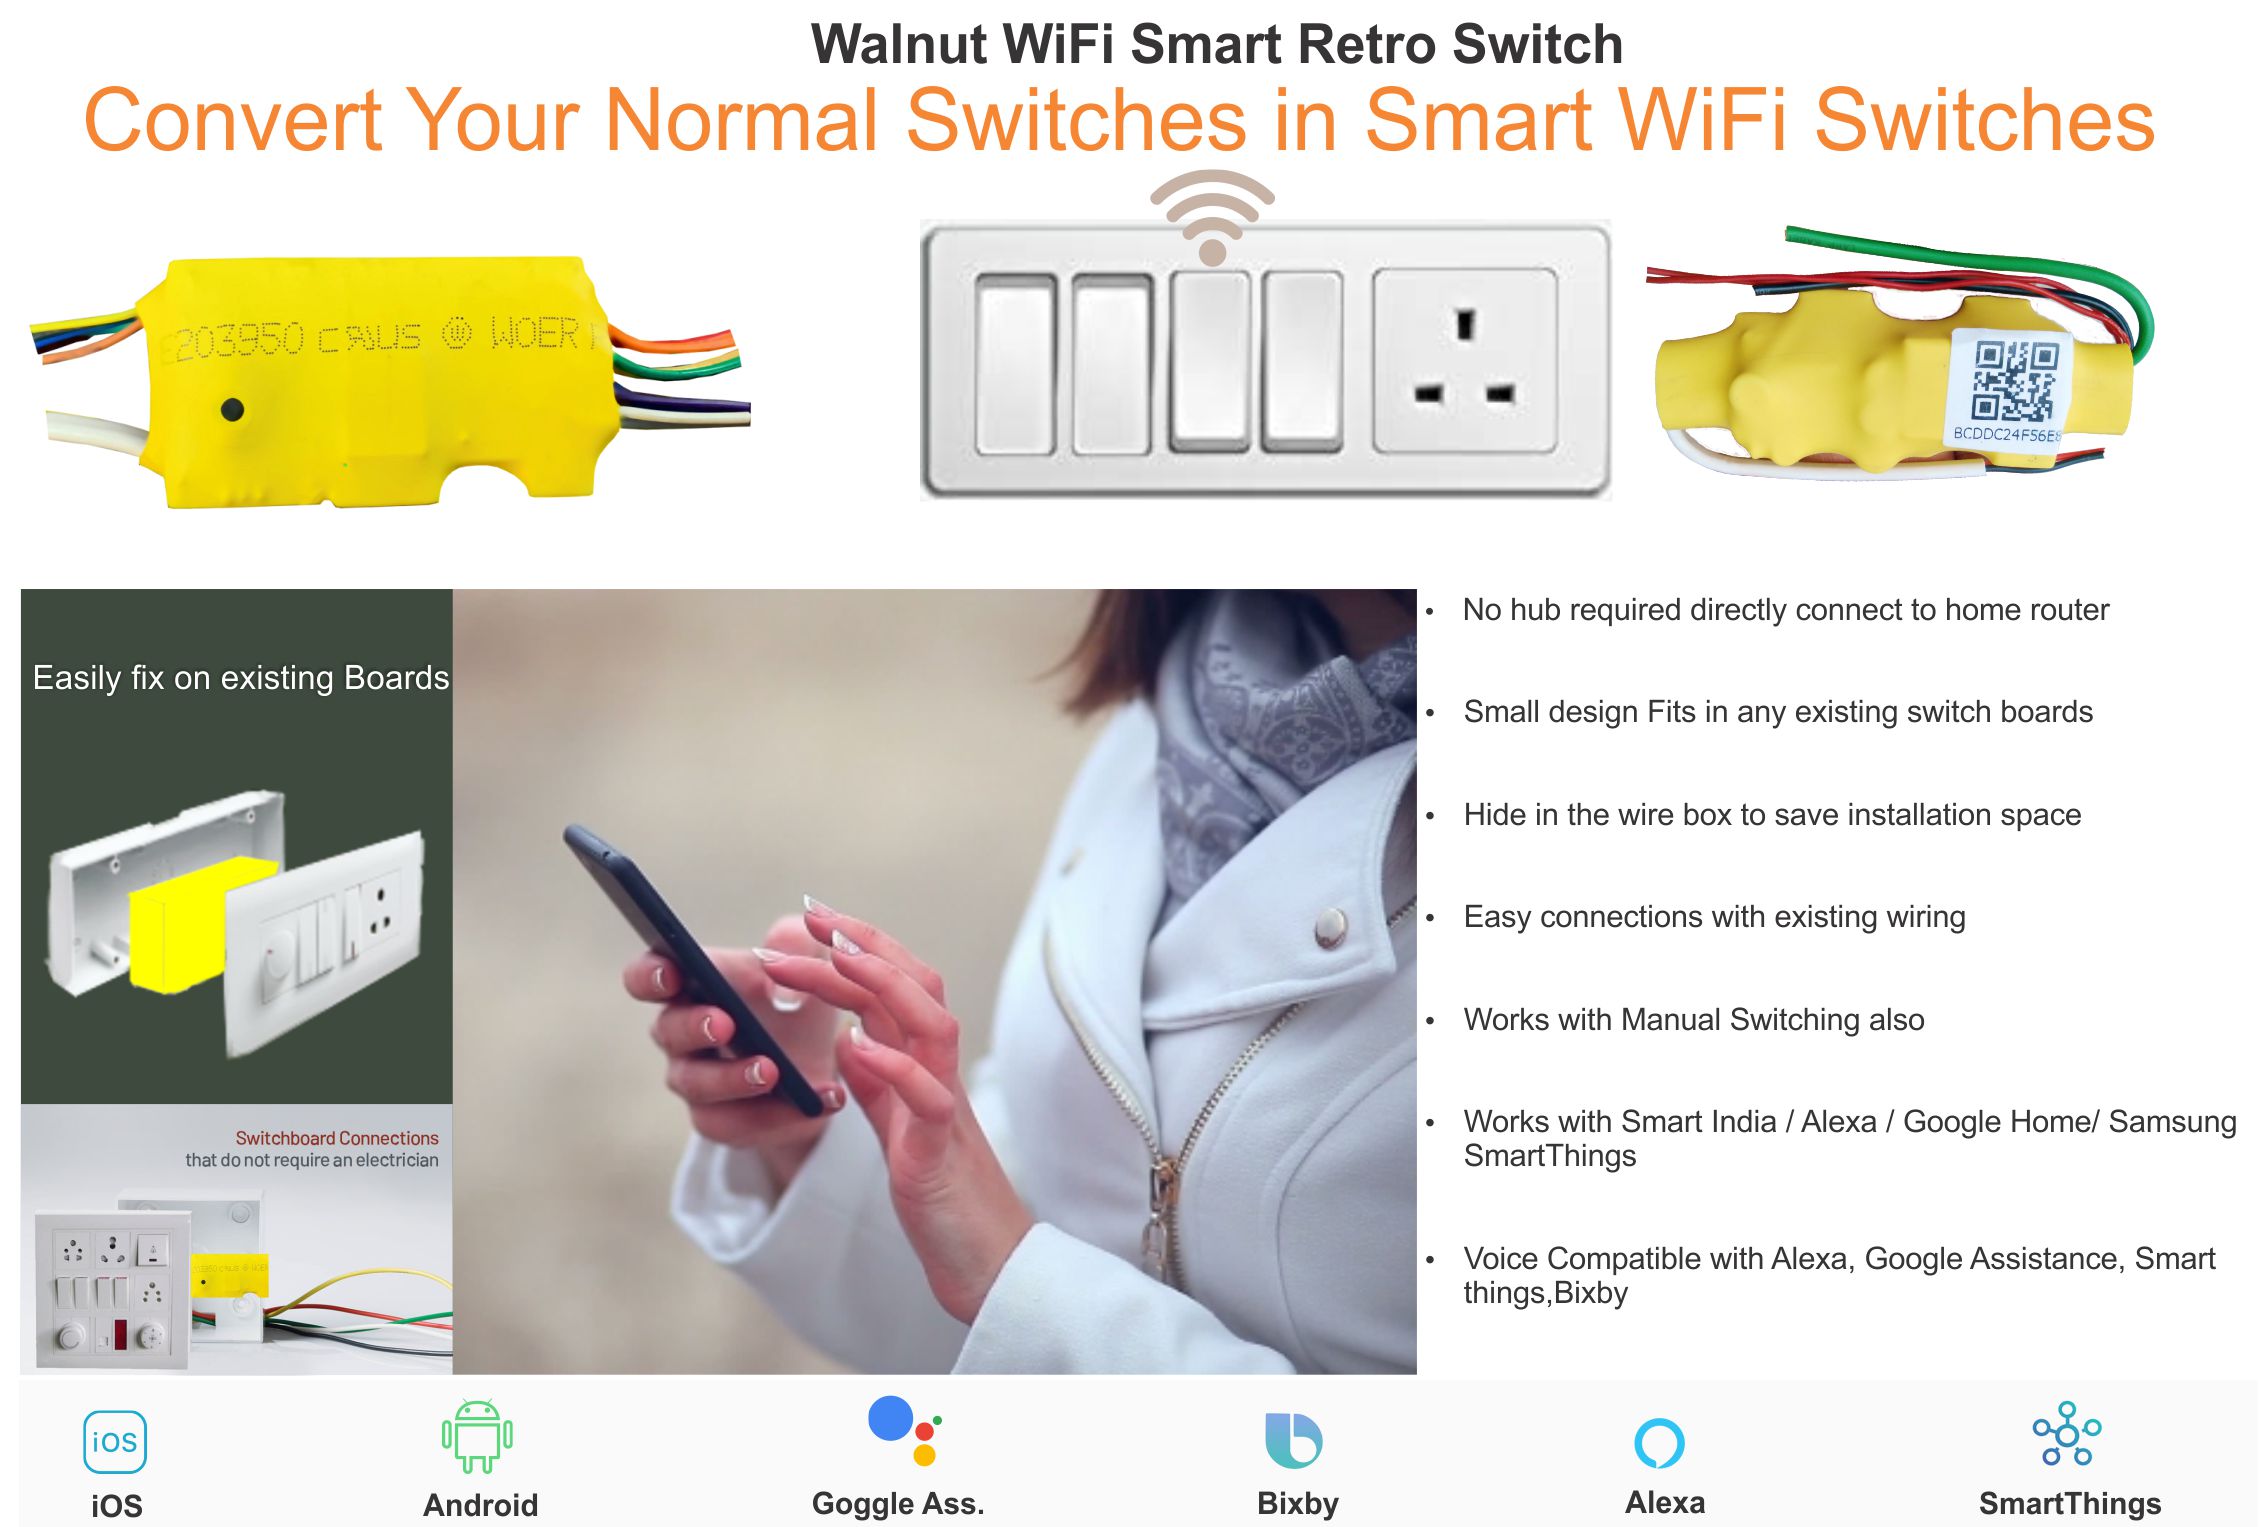 walnut-innovations-1-node-smart-24-amp-switch-retro-fit-with-manual-control-no-hub-required-compatible-with-alexa-and-google-home